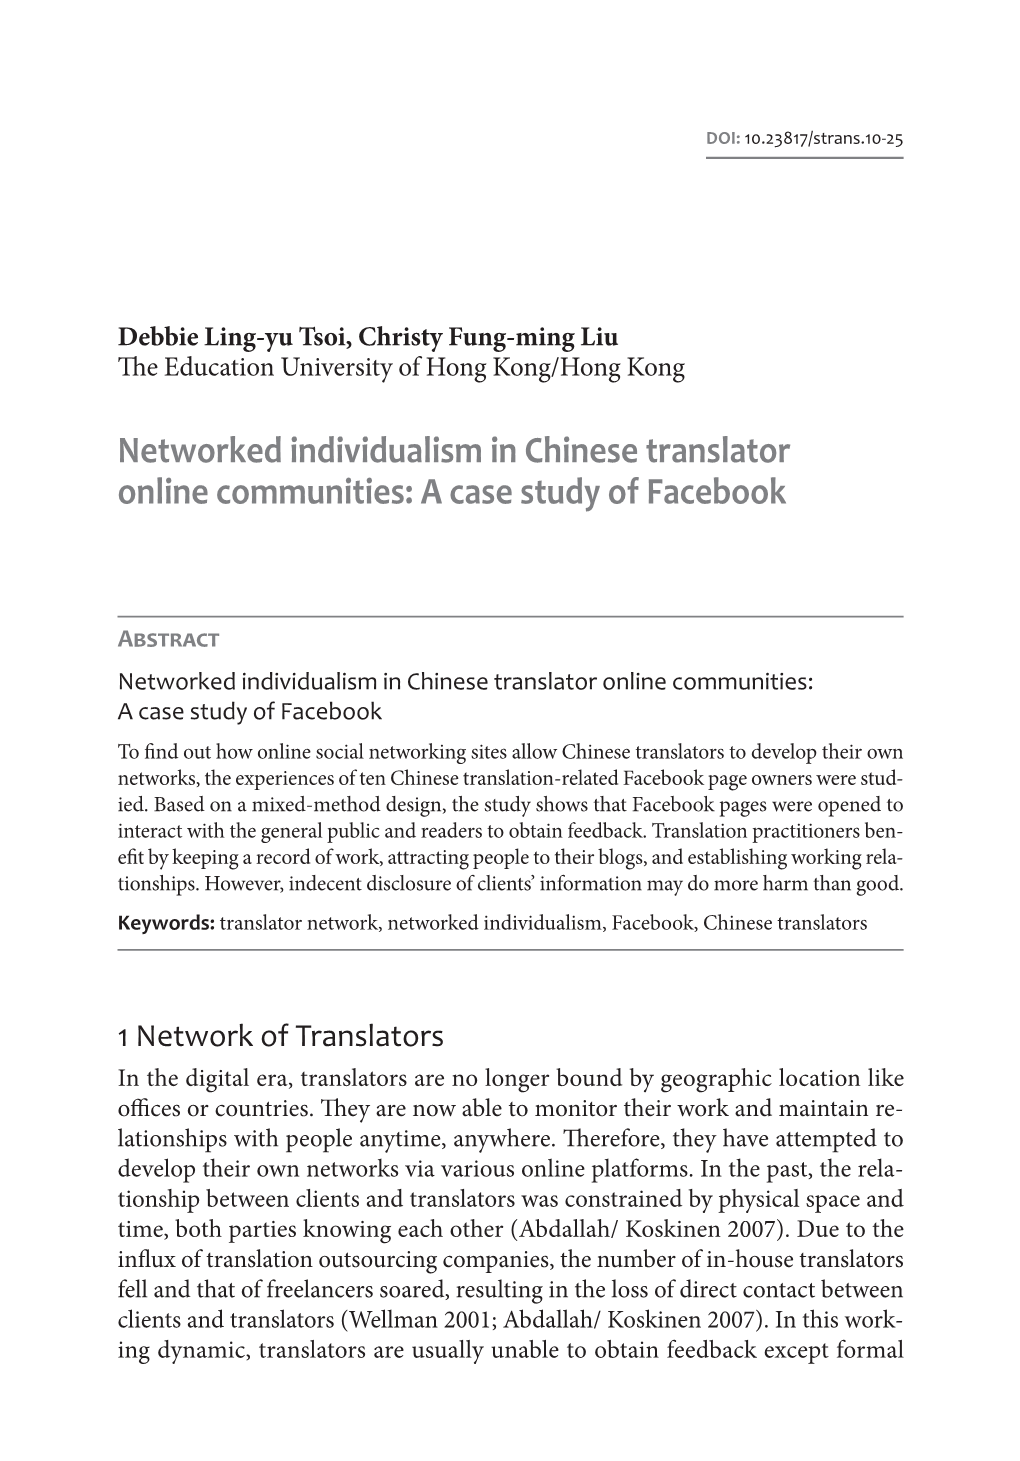 Networked Individualism in Chinese Translator Online Communities: a Case Study of Facebook